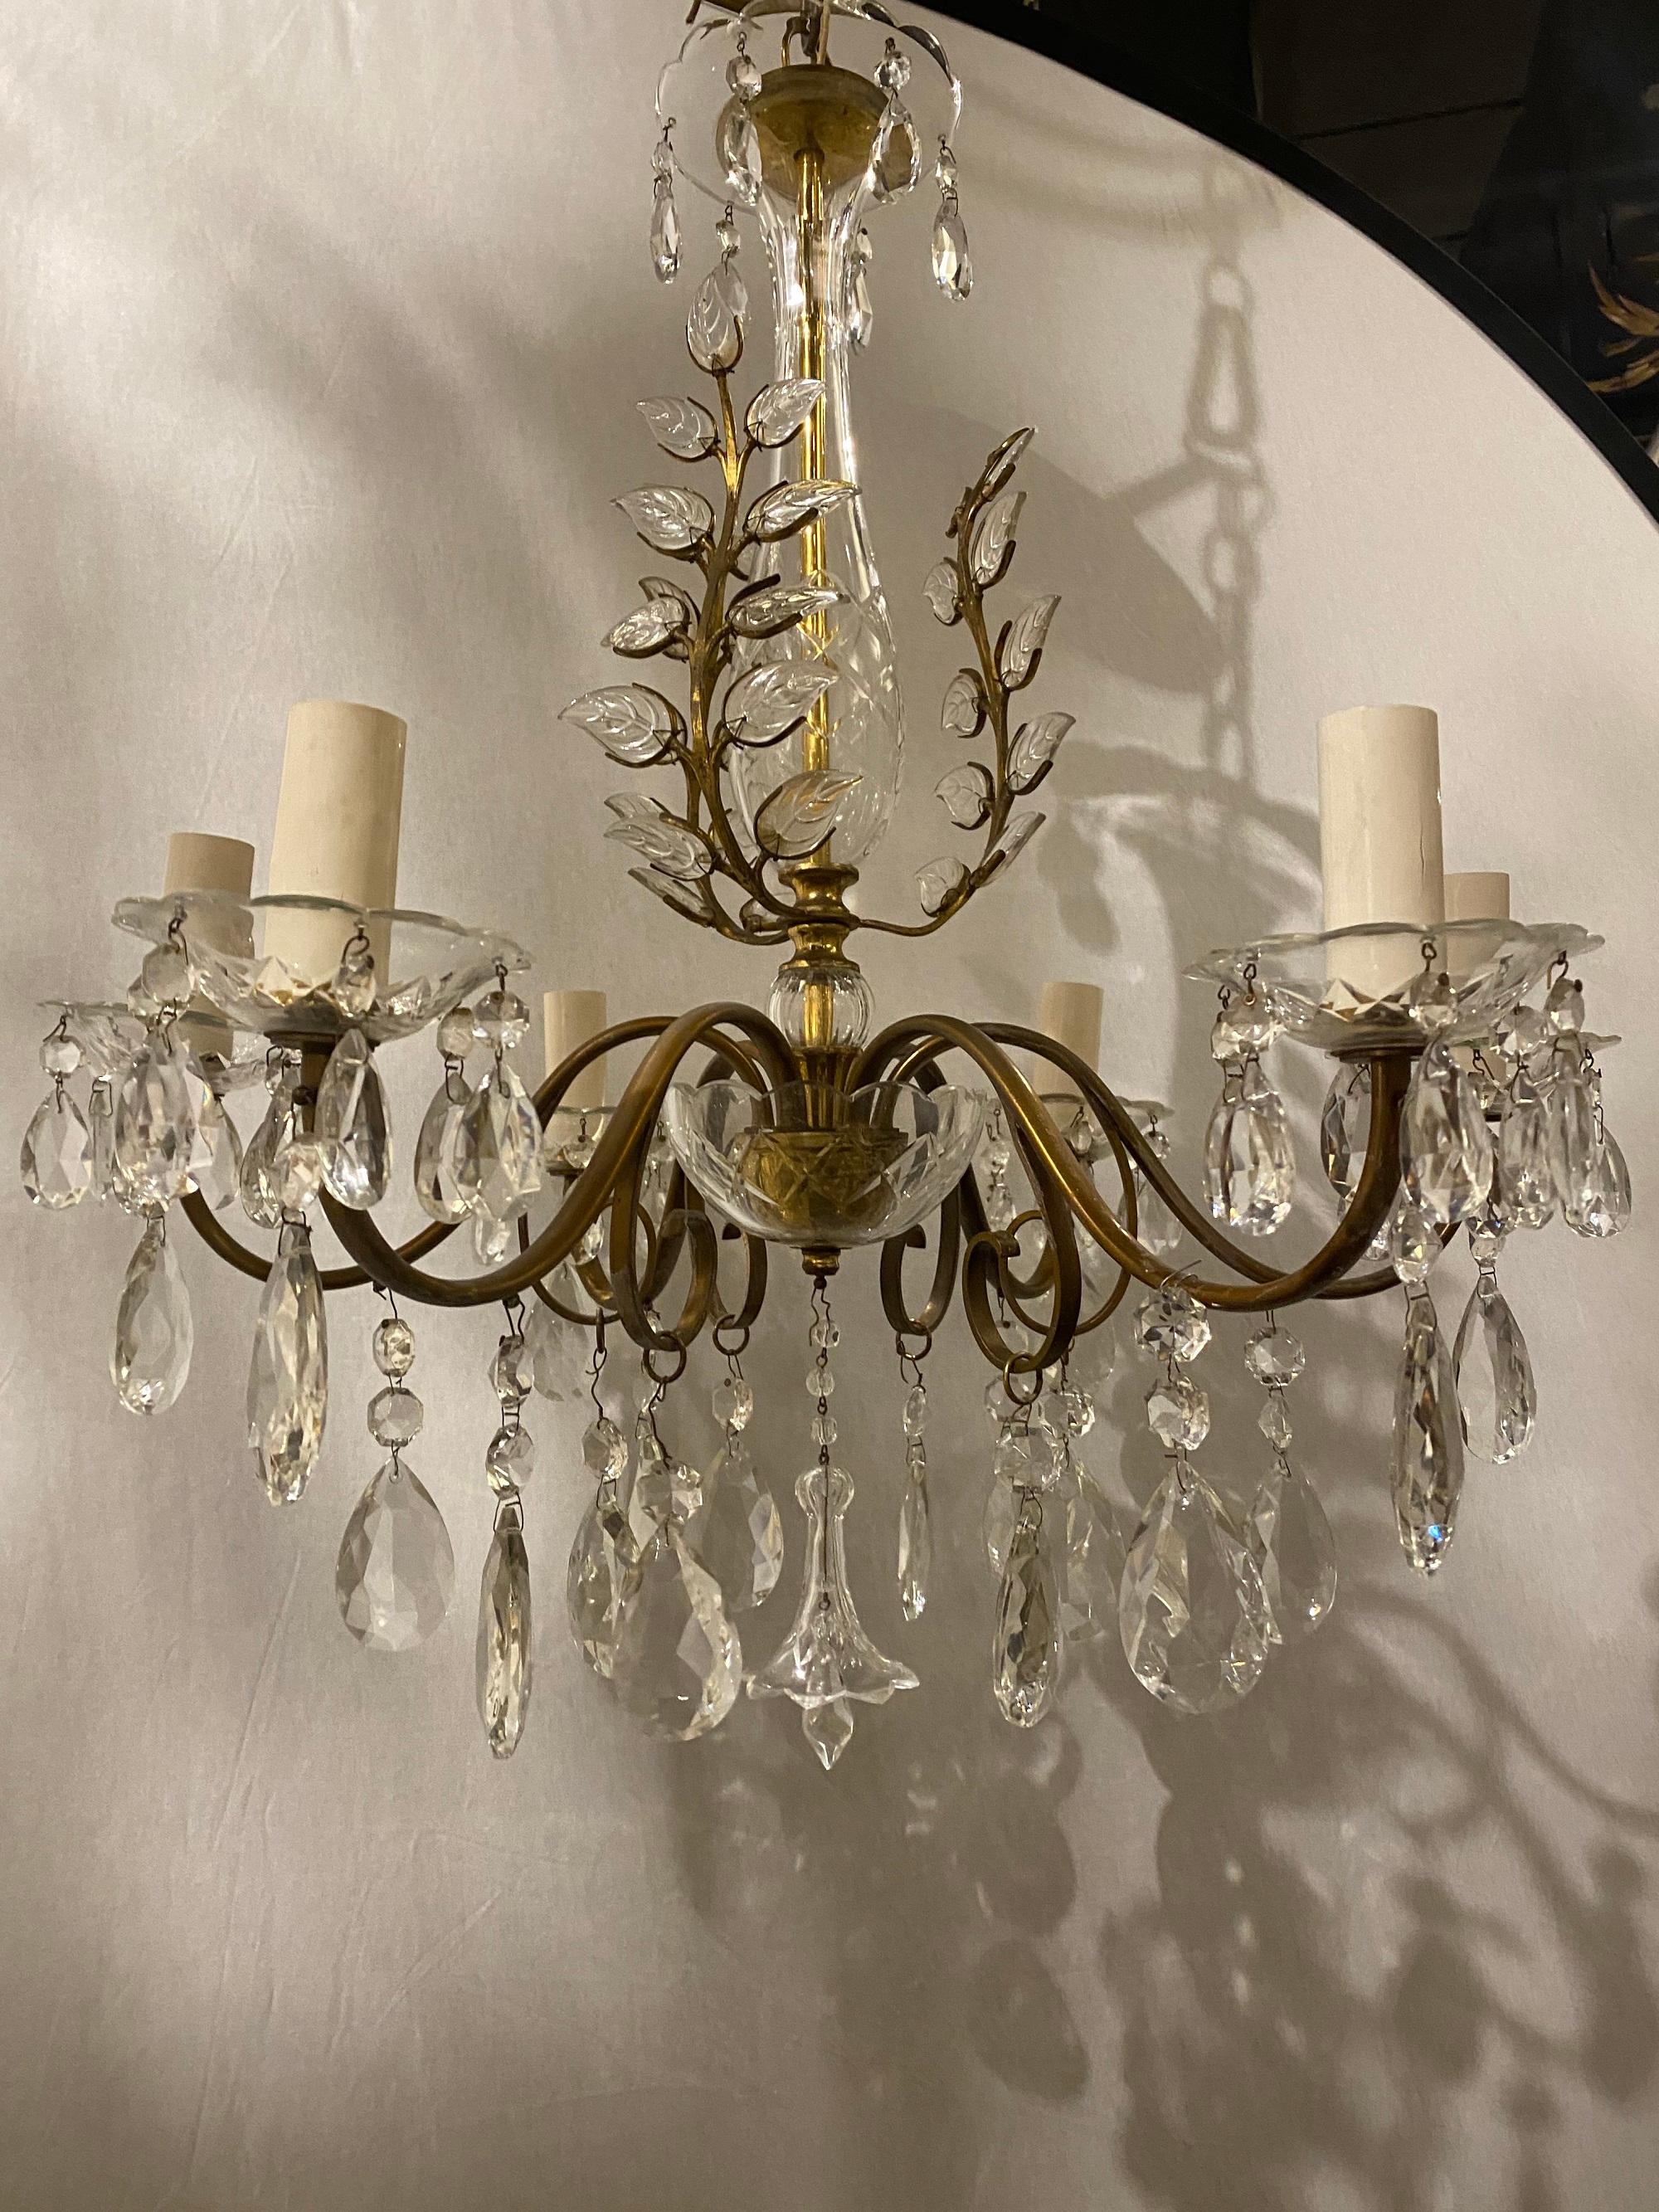 A circa 1930’s French Bagues chandelier with crystals hangings and six lights